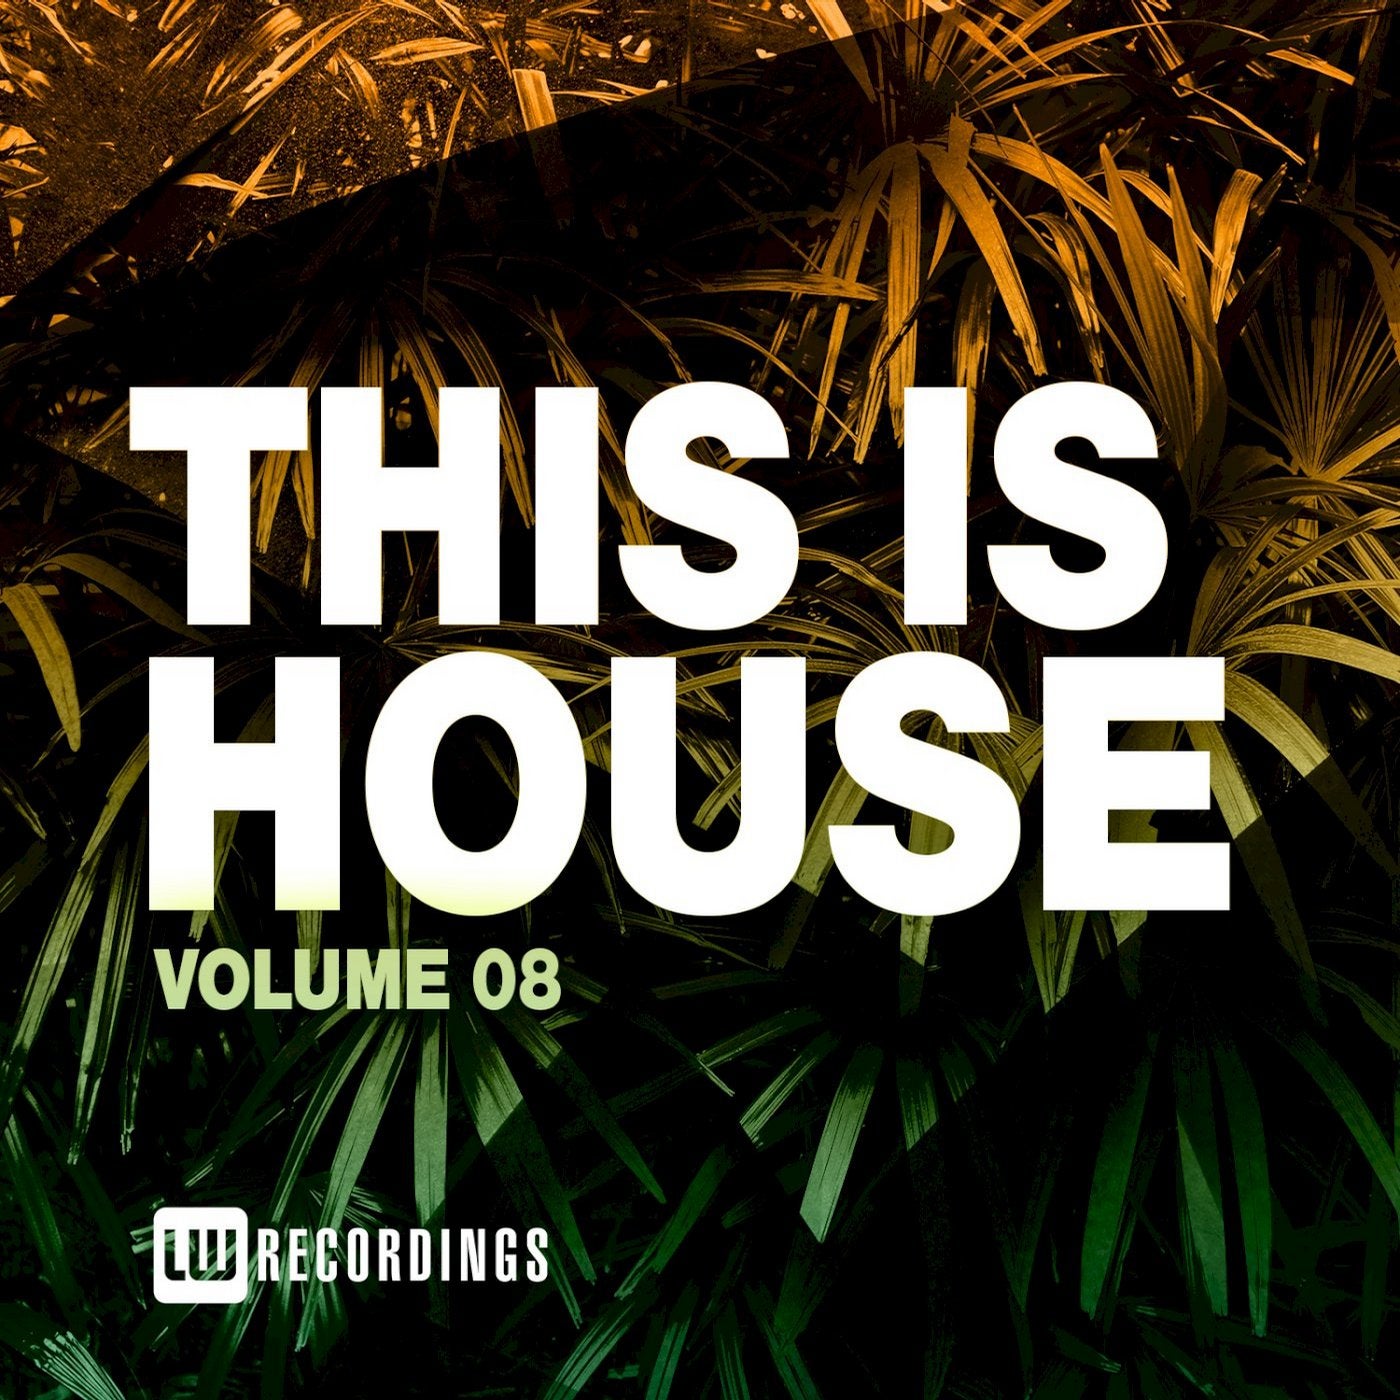 This Is House, Vol. 08